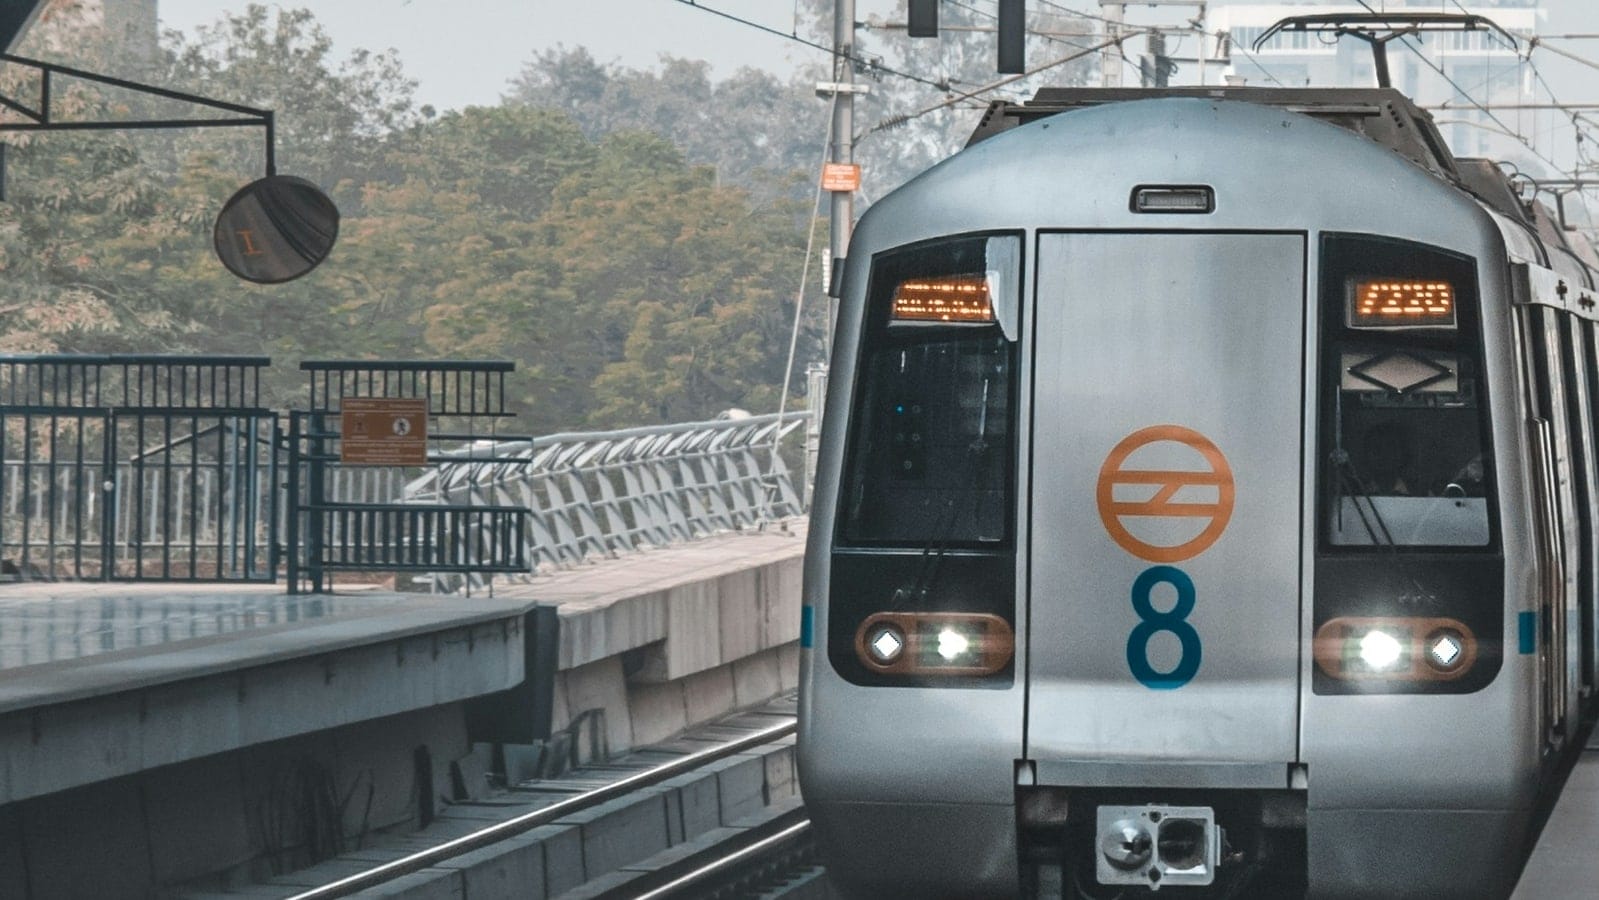 16-year-old teen alleges sexual assault in Delhi Metro: ‘I was scared and shaking’